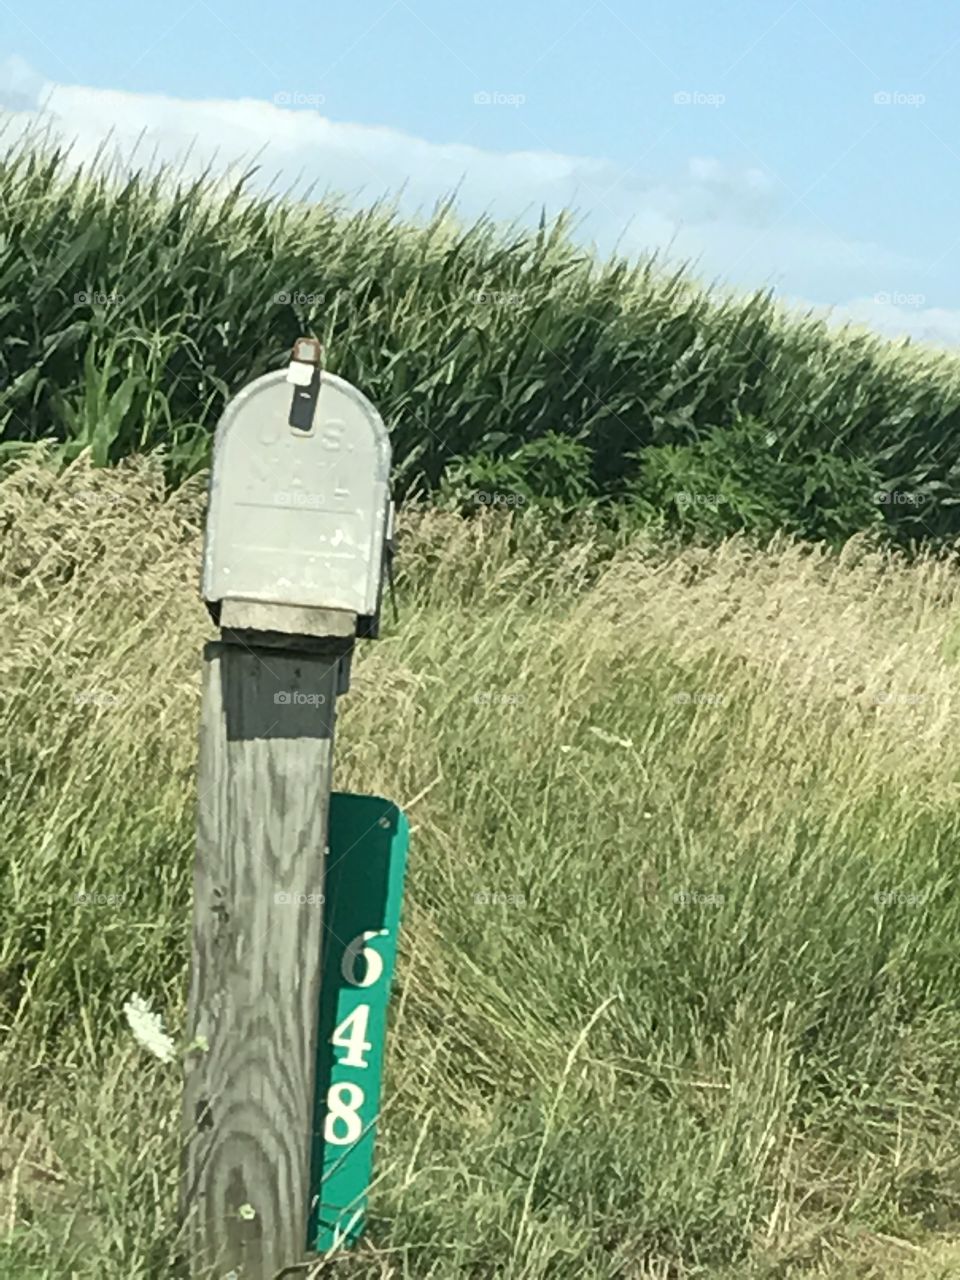 Mailbox for old house in Illinois 